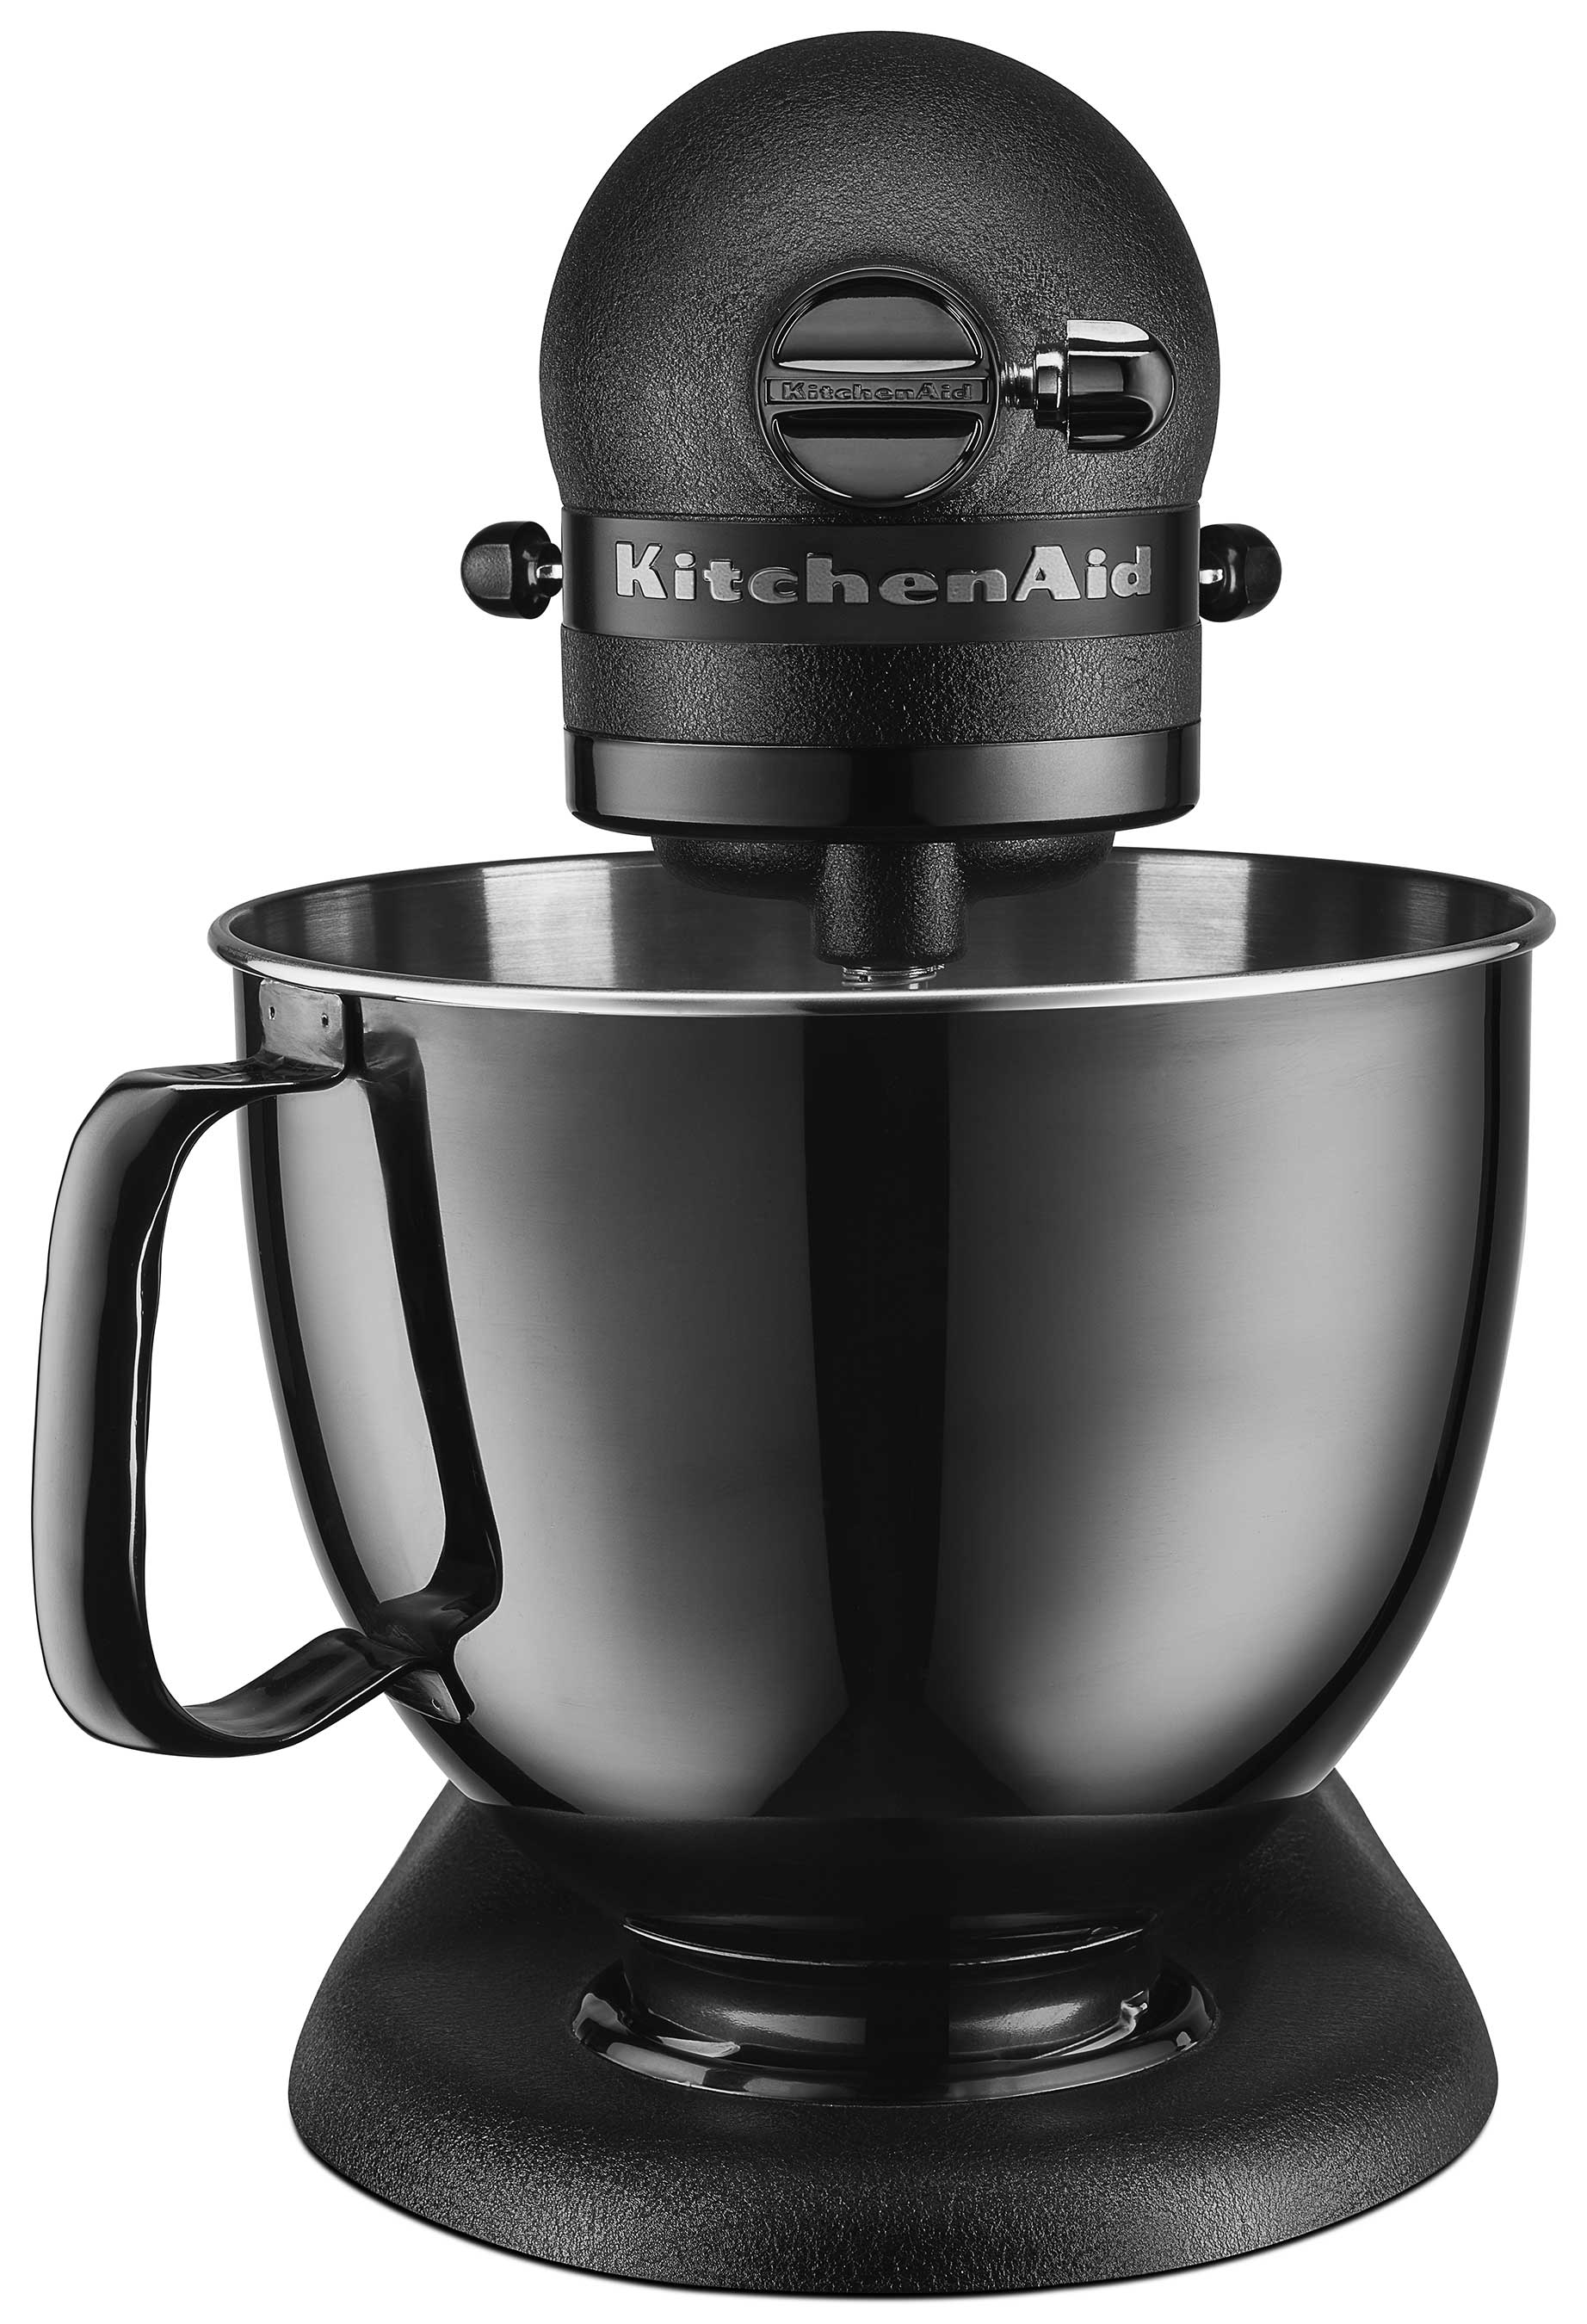 KitchenAid unveiled its first monochromatic Black Tie stand mixer as a limited edition offering. The new mixer marks both a celebration and evolution of this iconic kitchen essential’s 85 available colors and finishes.